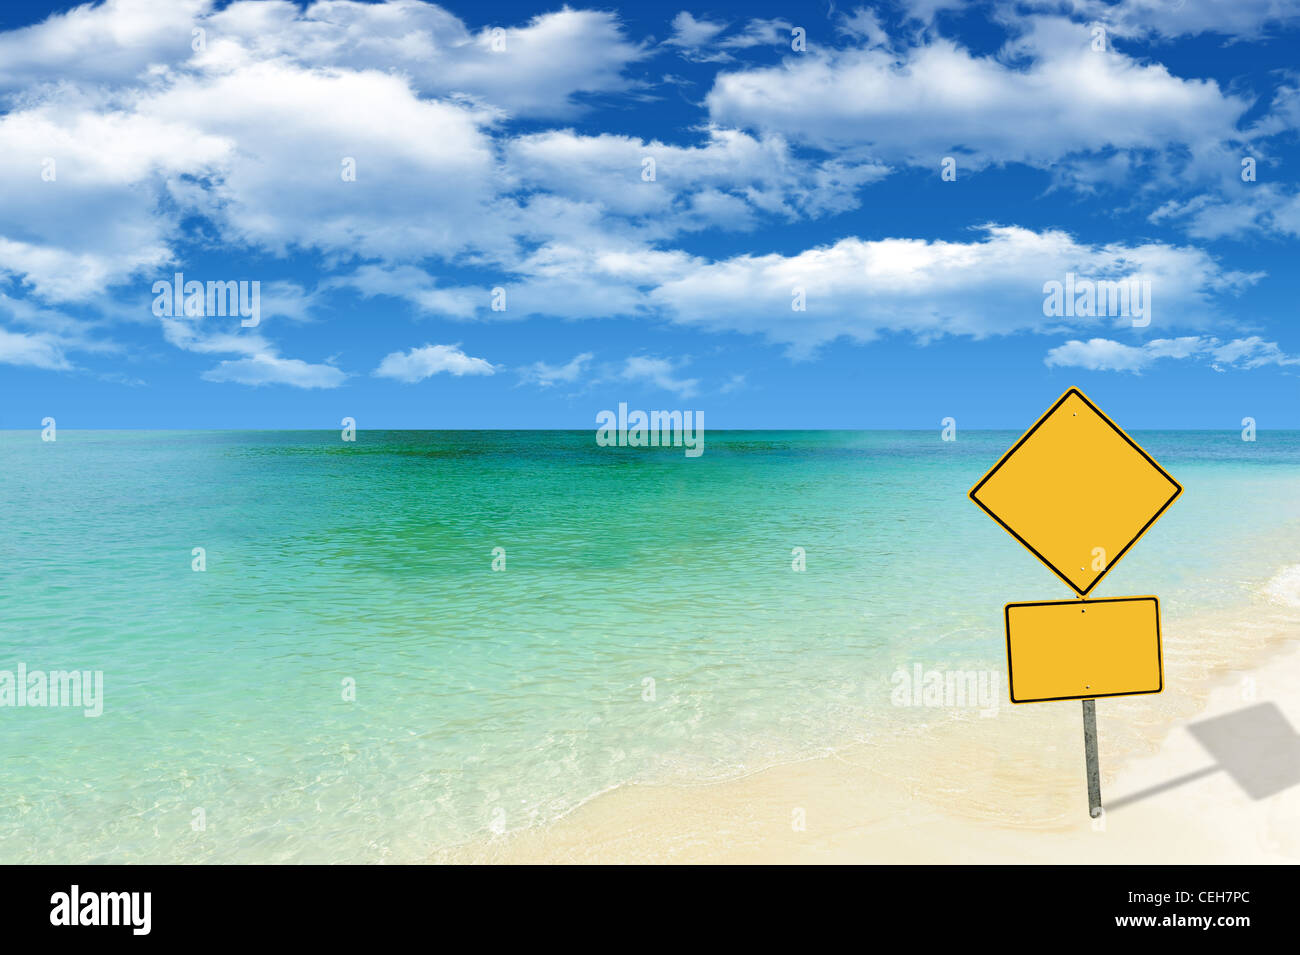 Beautiful remote beach with yellow sign Stock Photo